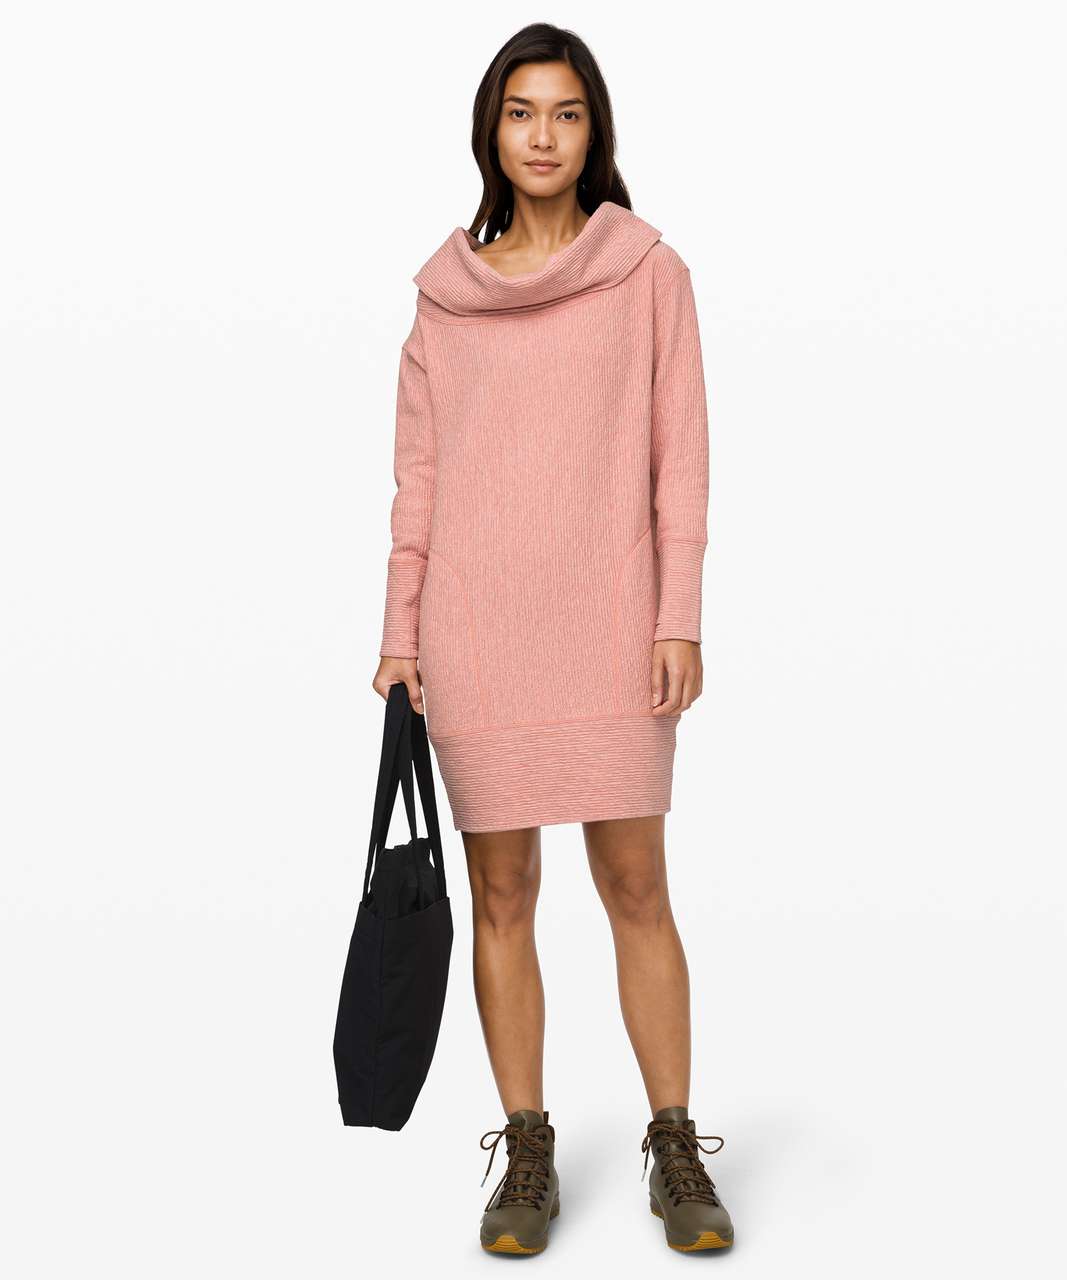 Lululemon Along the Way Dress - Heathered Copper Clay